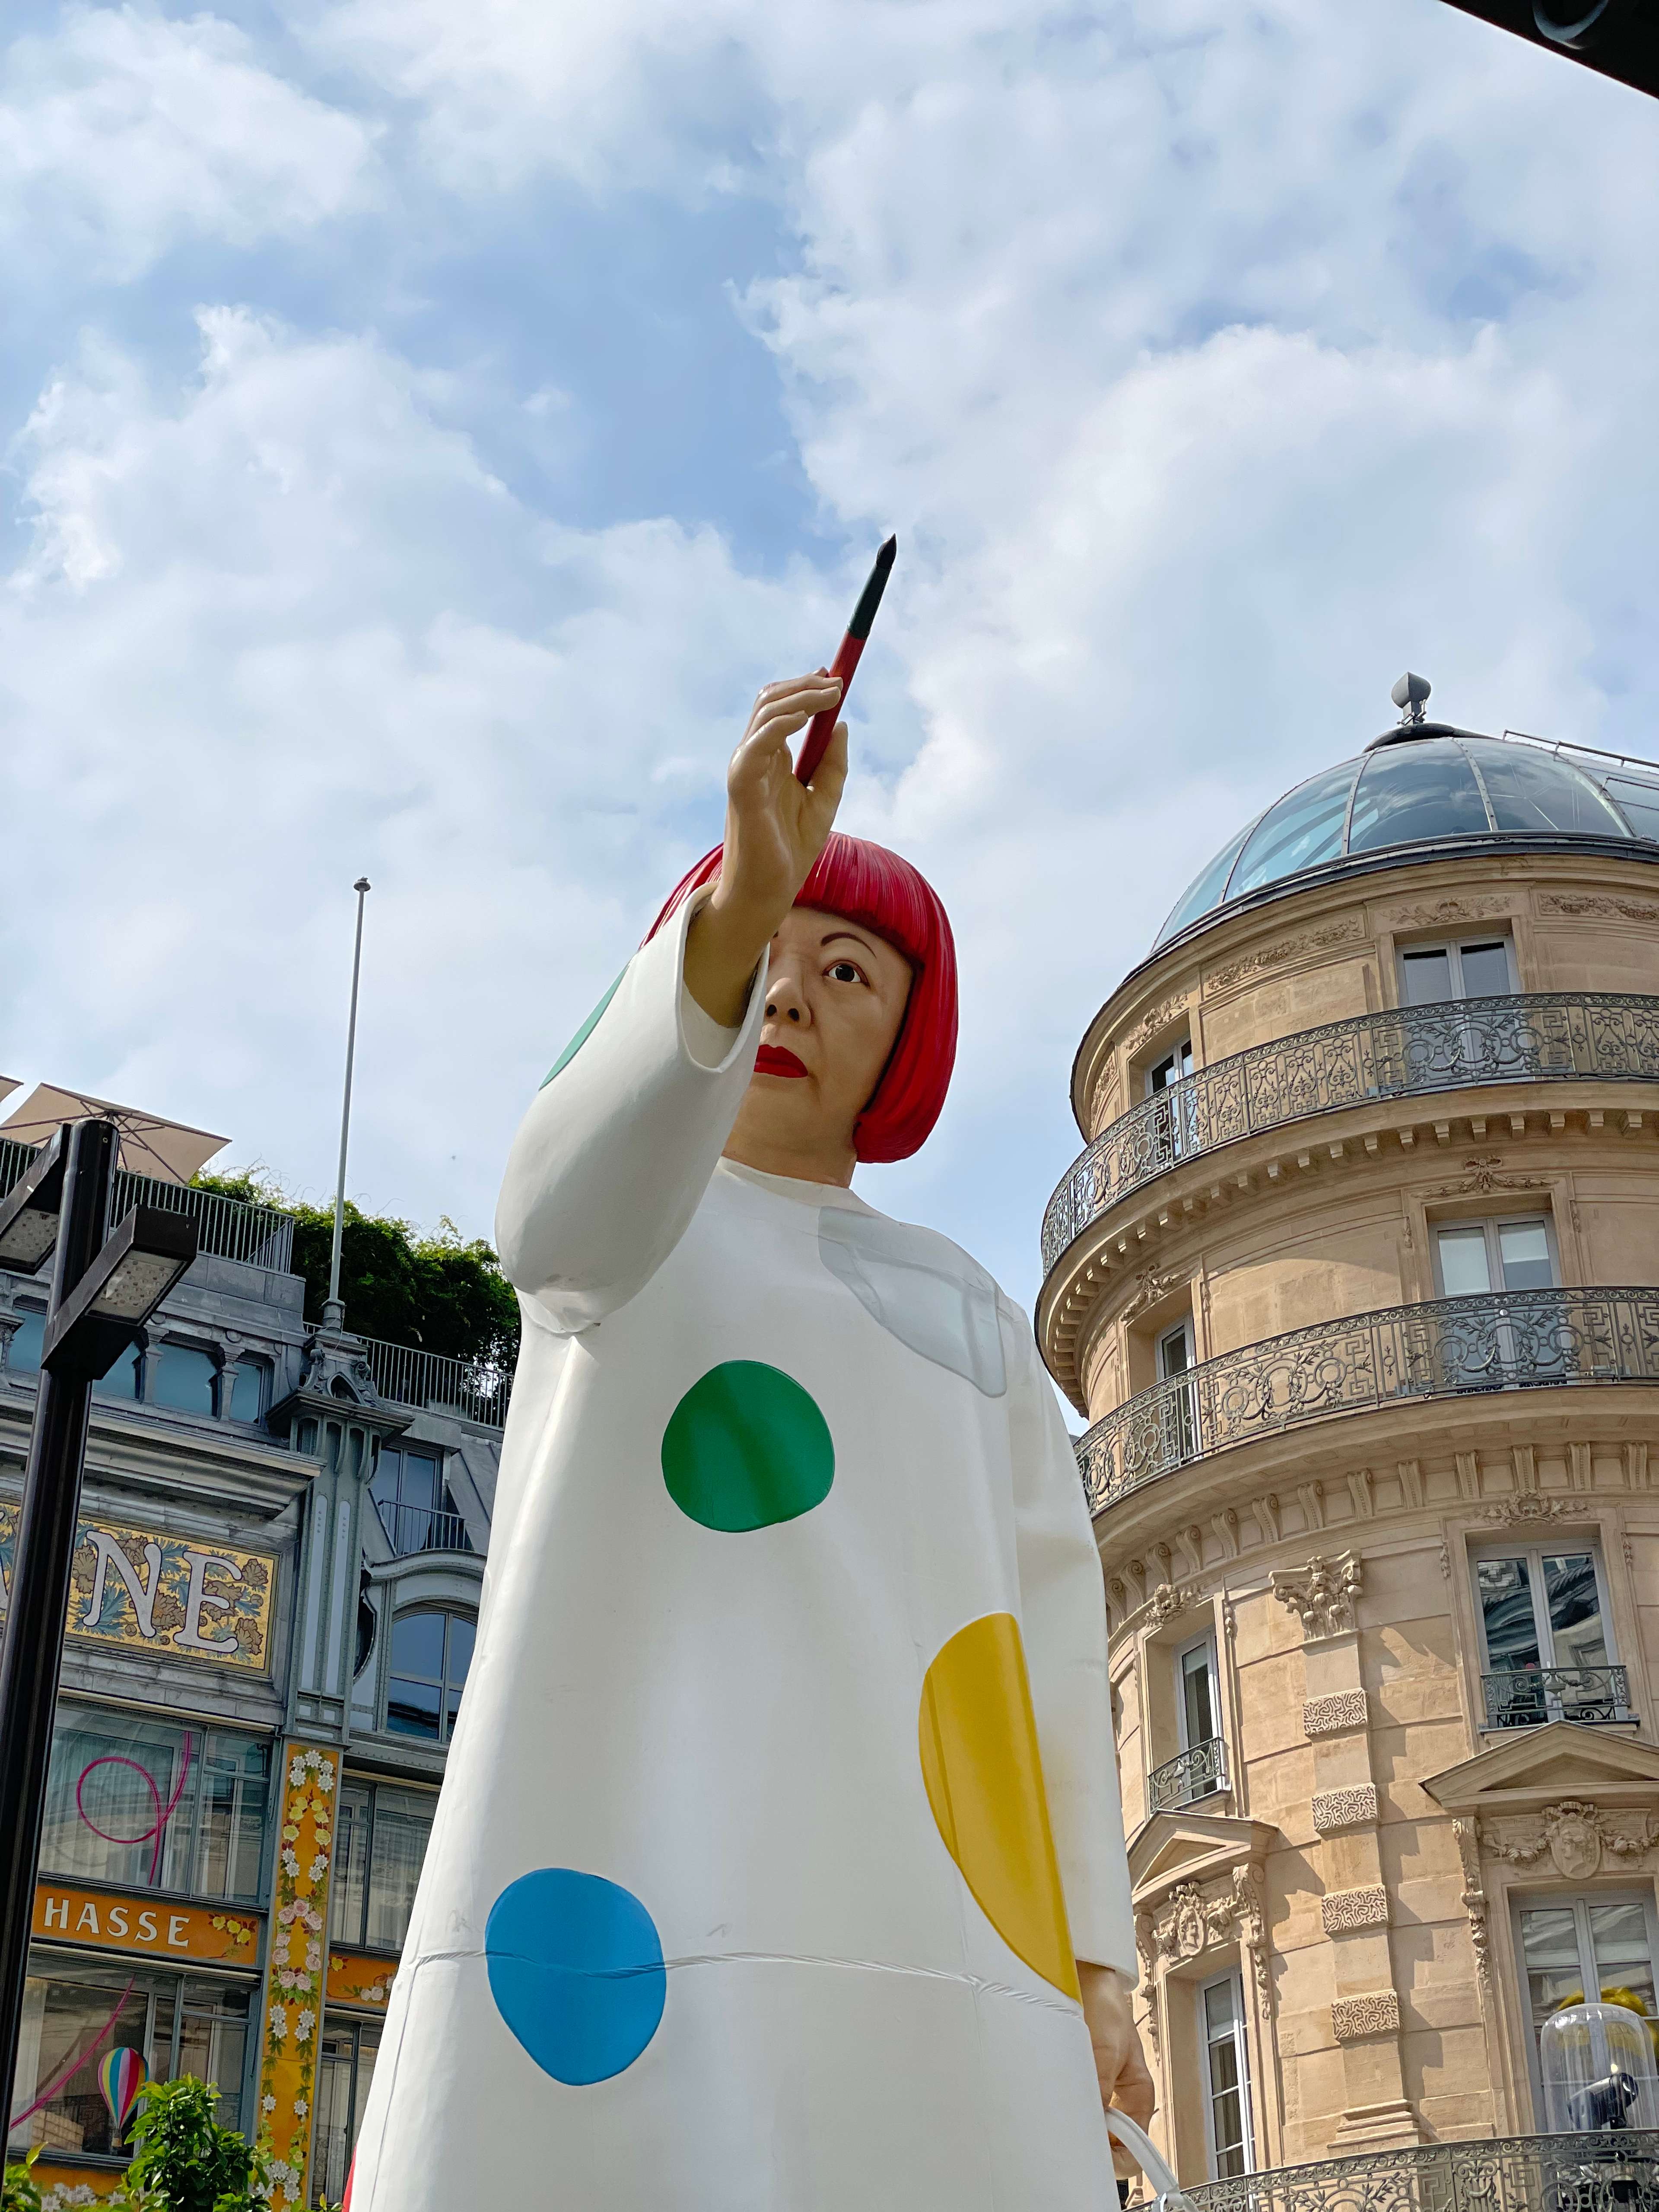 A photograph of the large sculpture of artist Yayoi Kusama in Paris. The sculpture shows the artist in a red bob wig, wearing a white gown with coloured polka dots, holding up a paintbrush